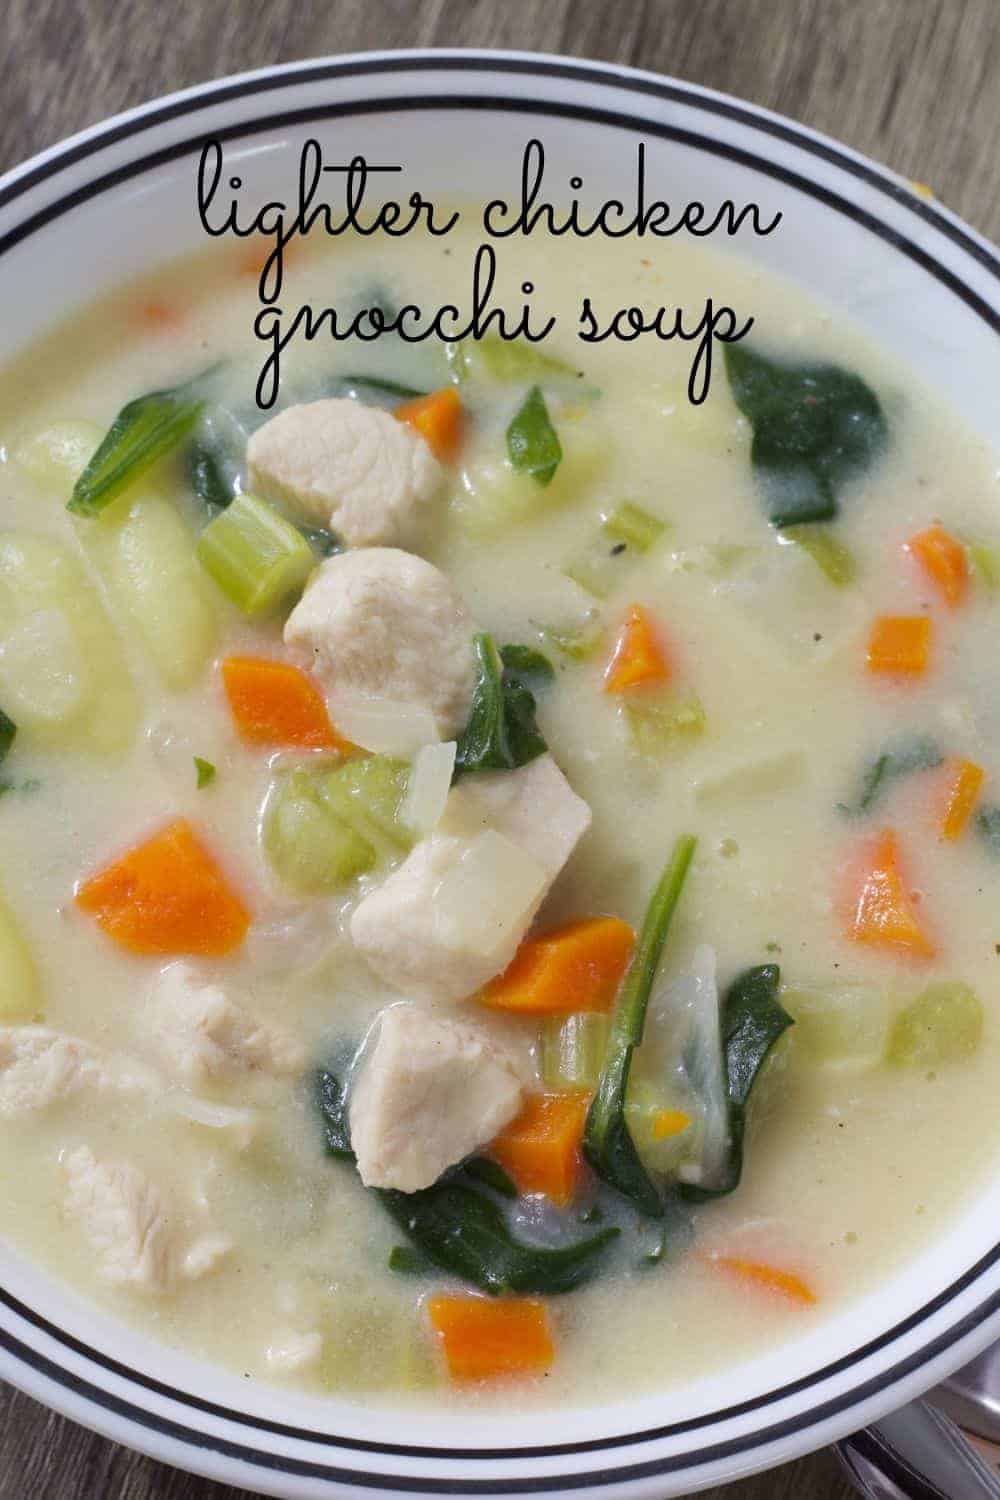 Lighter Chicken Gnocchi Soup is a hearty and comforting dish that uses milk instead of heavy cream to lighten up this Olive Garden favorite!